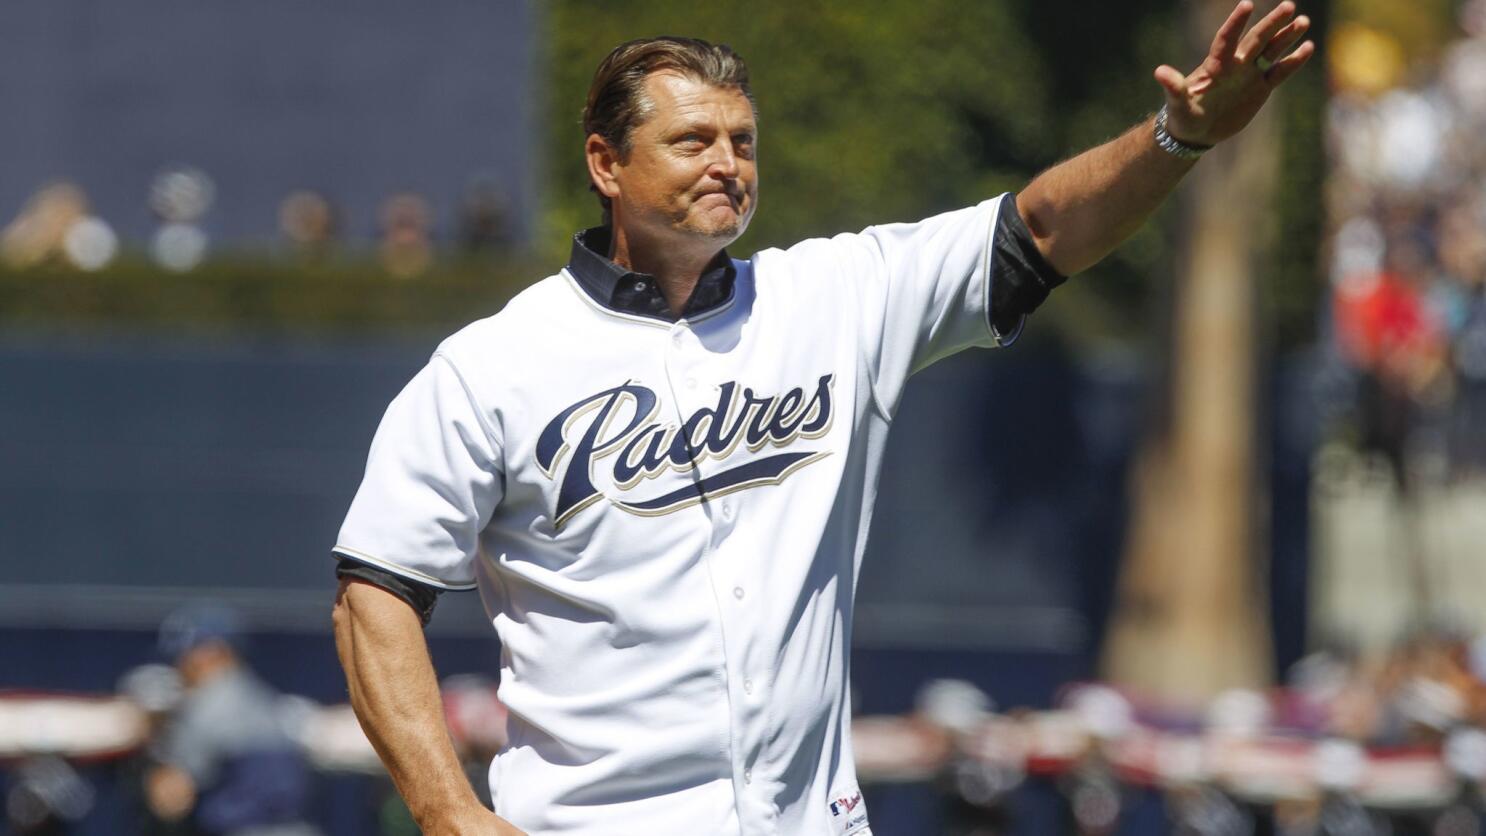 Petco Park to air Hoffman HOF induction before Sunday's Padres